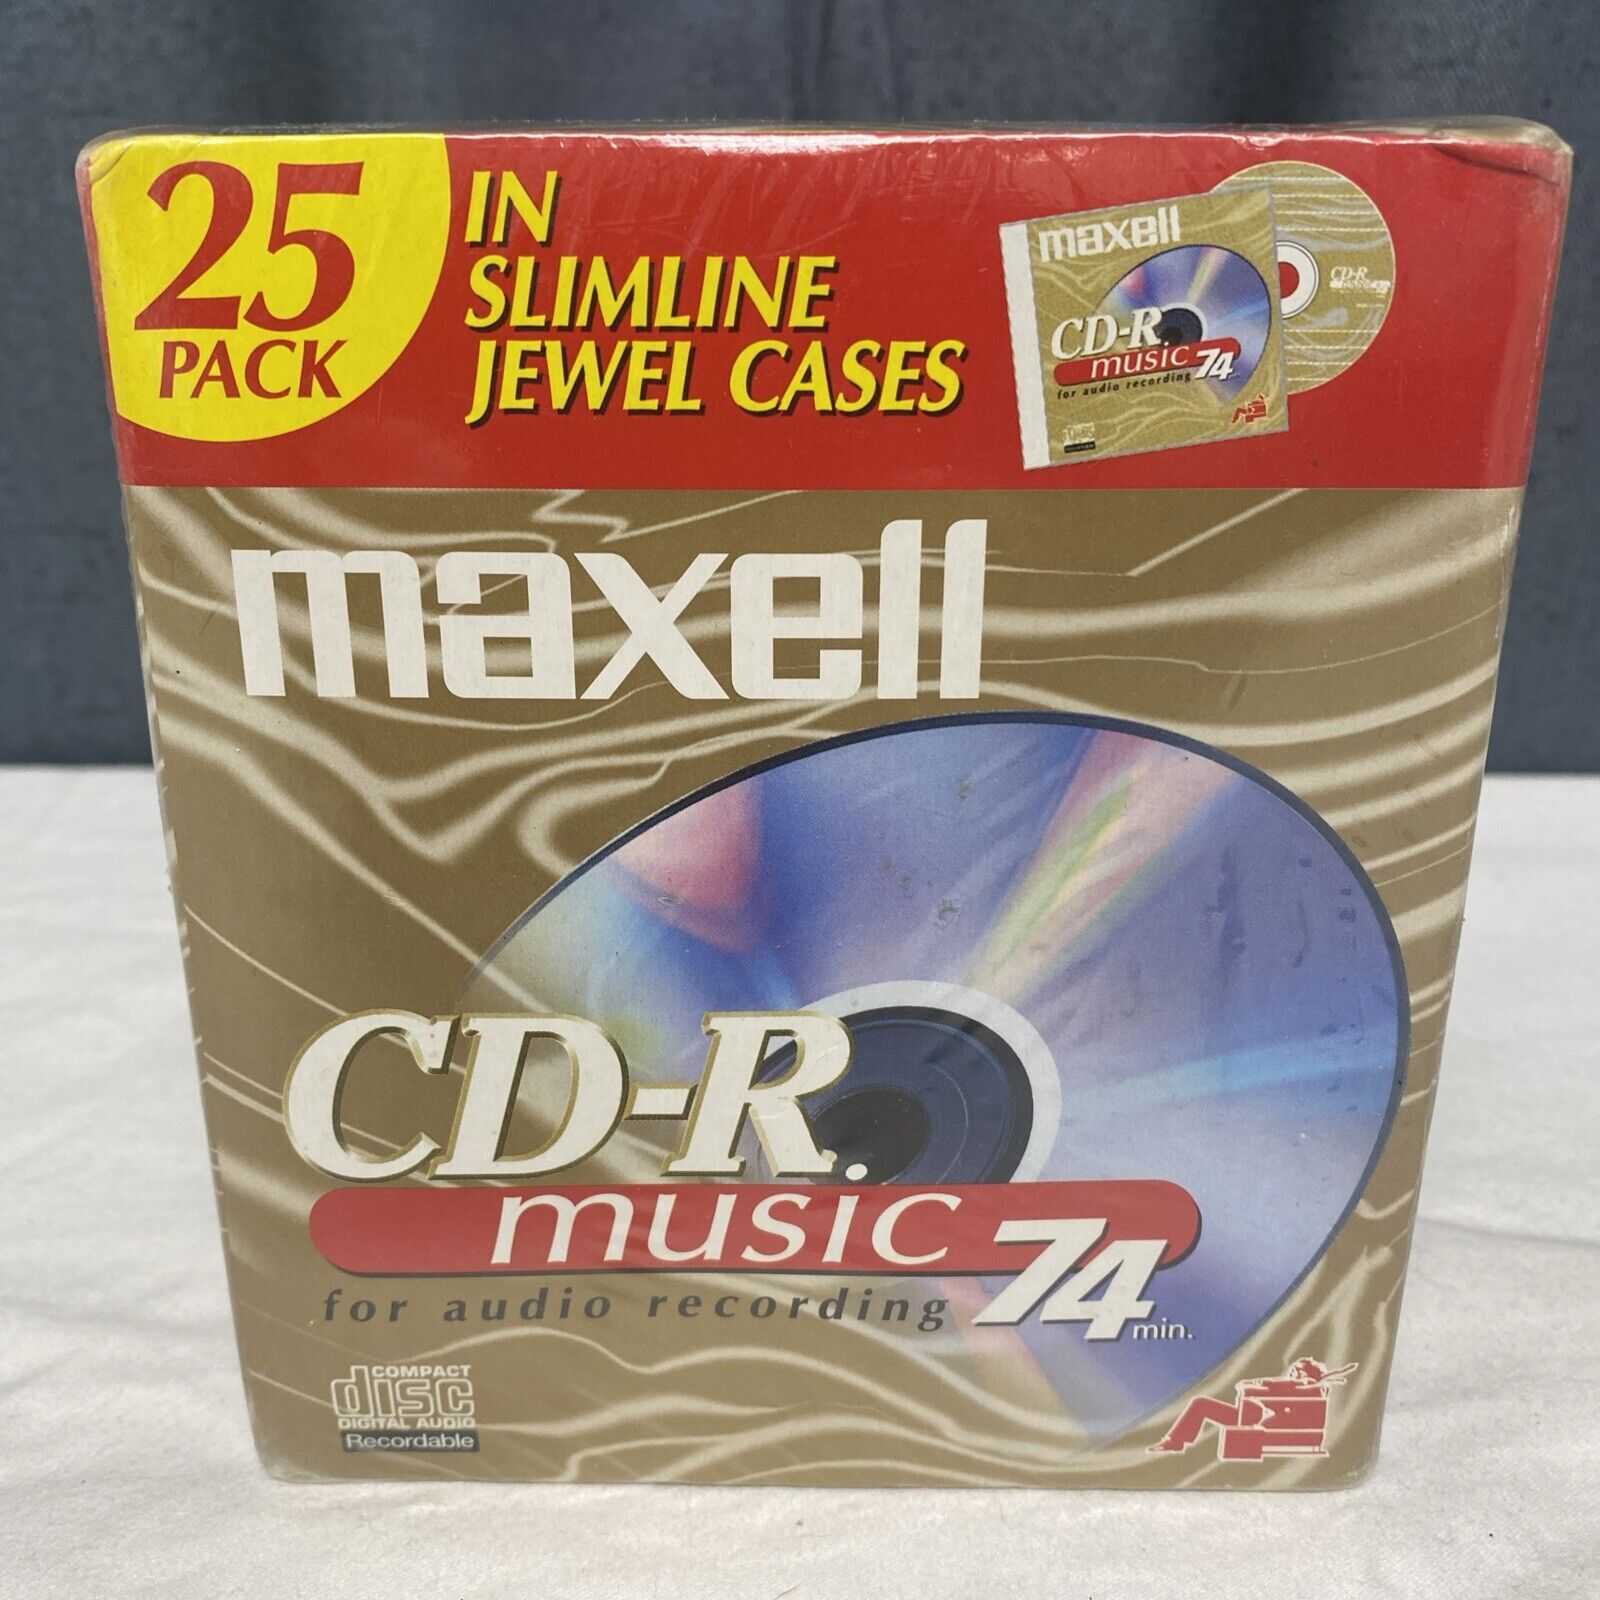 MAXELL CD-R Music 74 Min For Audio Recording, 25 Pack.NEW SEALED 